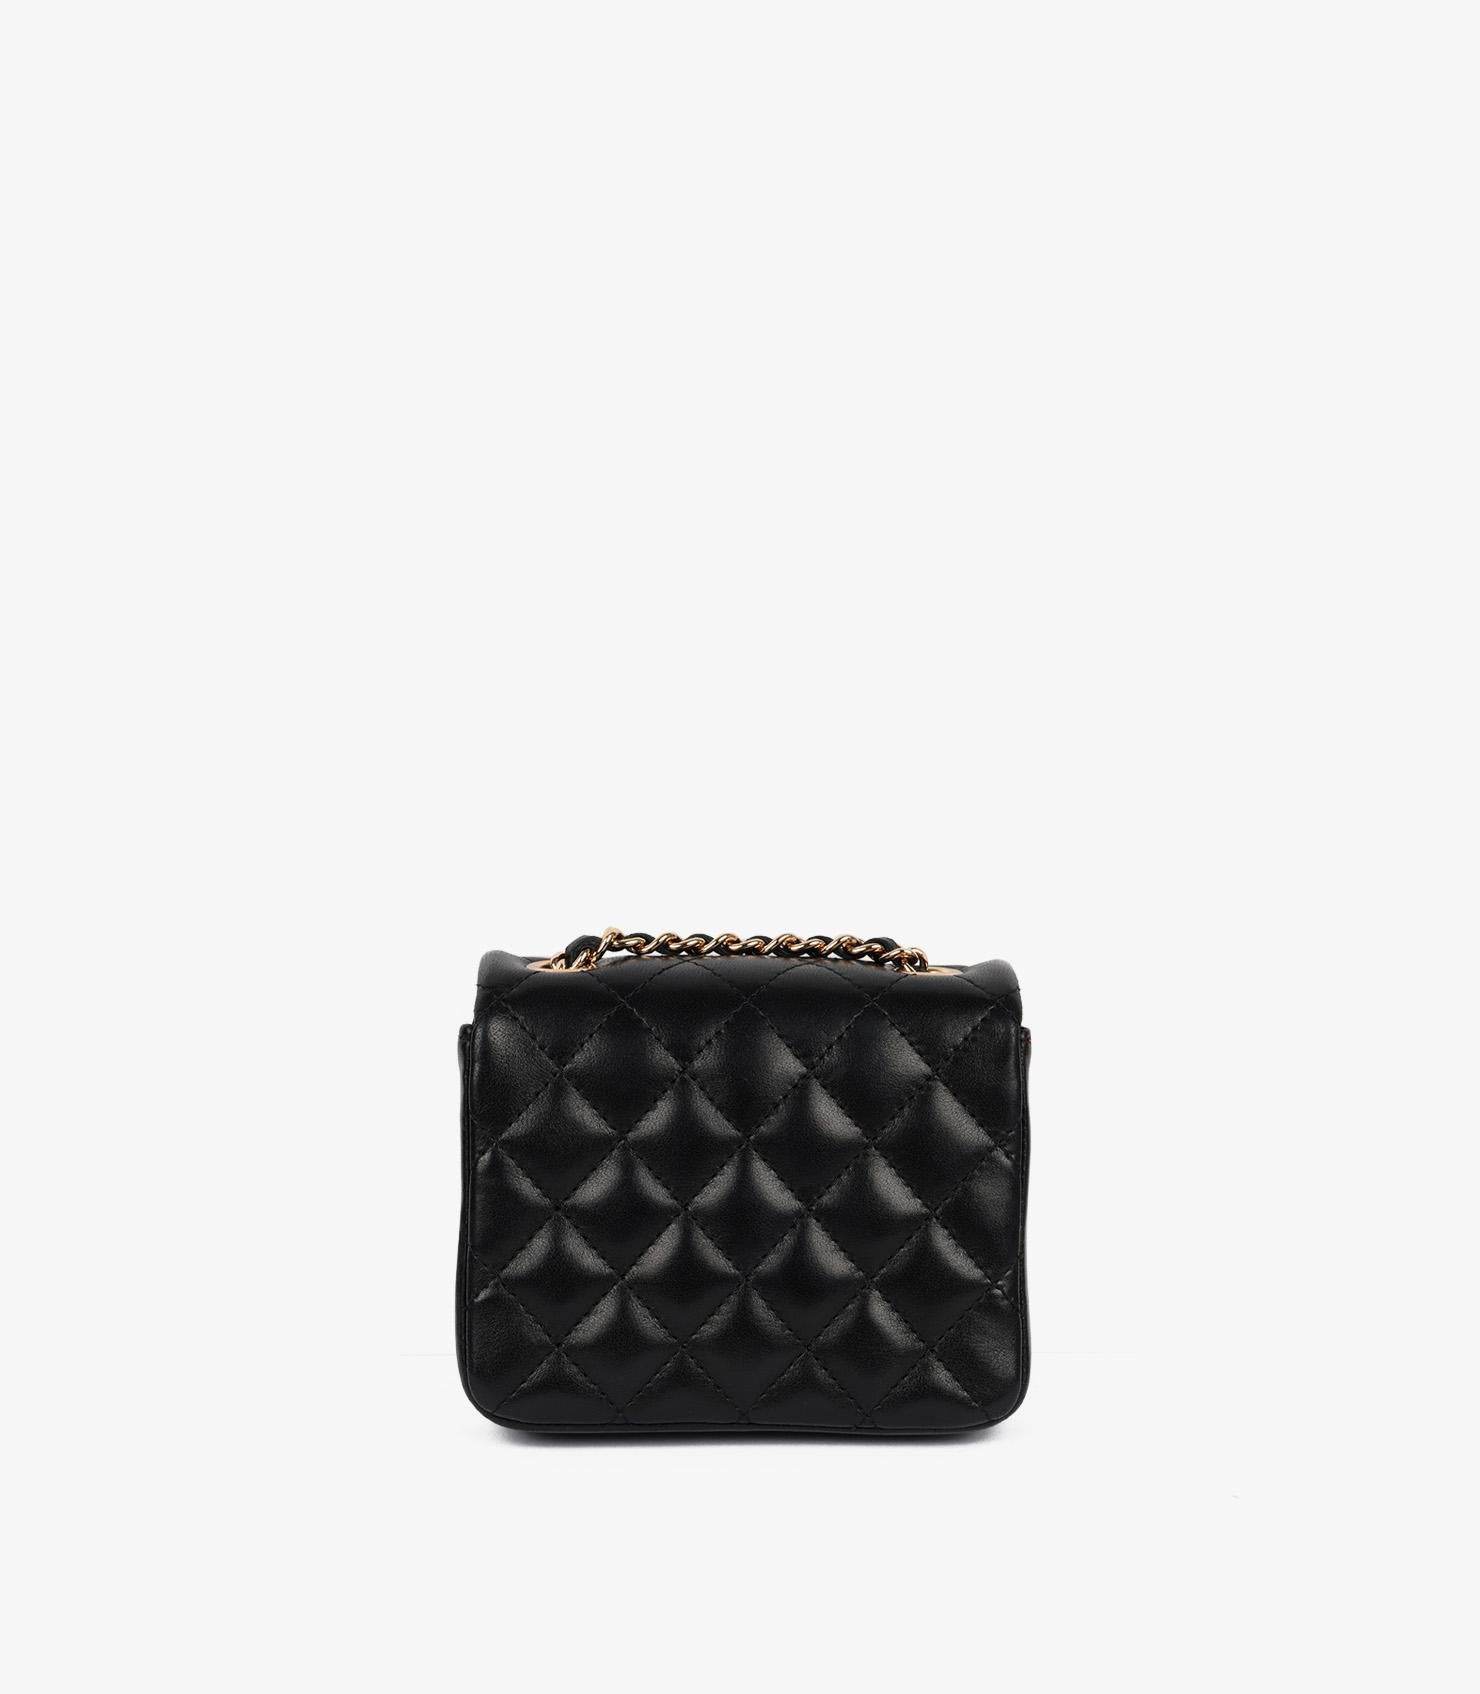 Chanel Black Quilted Lambskin Square Micro Flap Bag For Sale 2